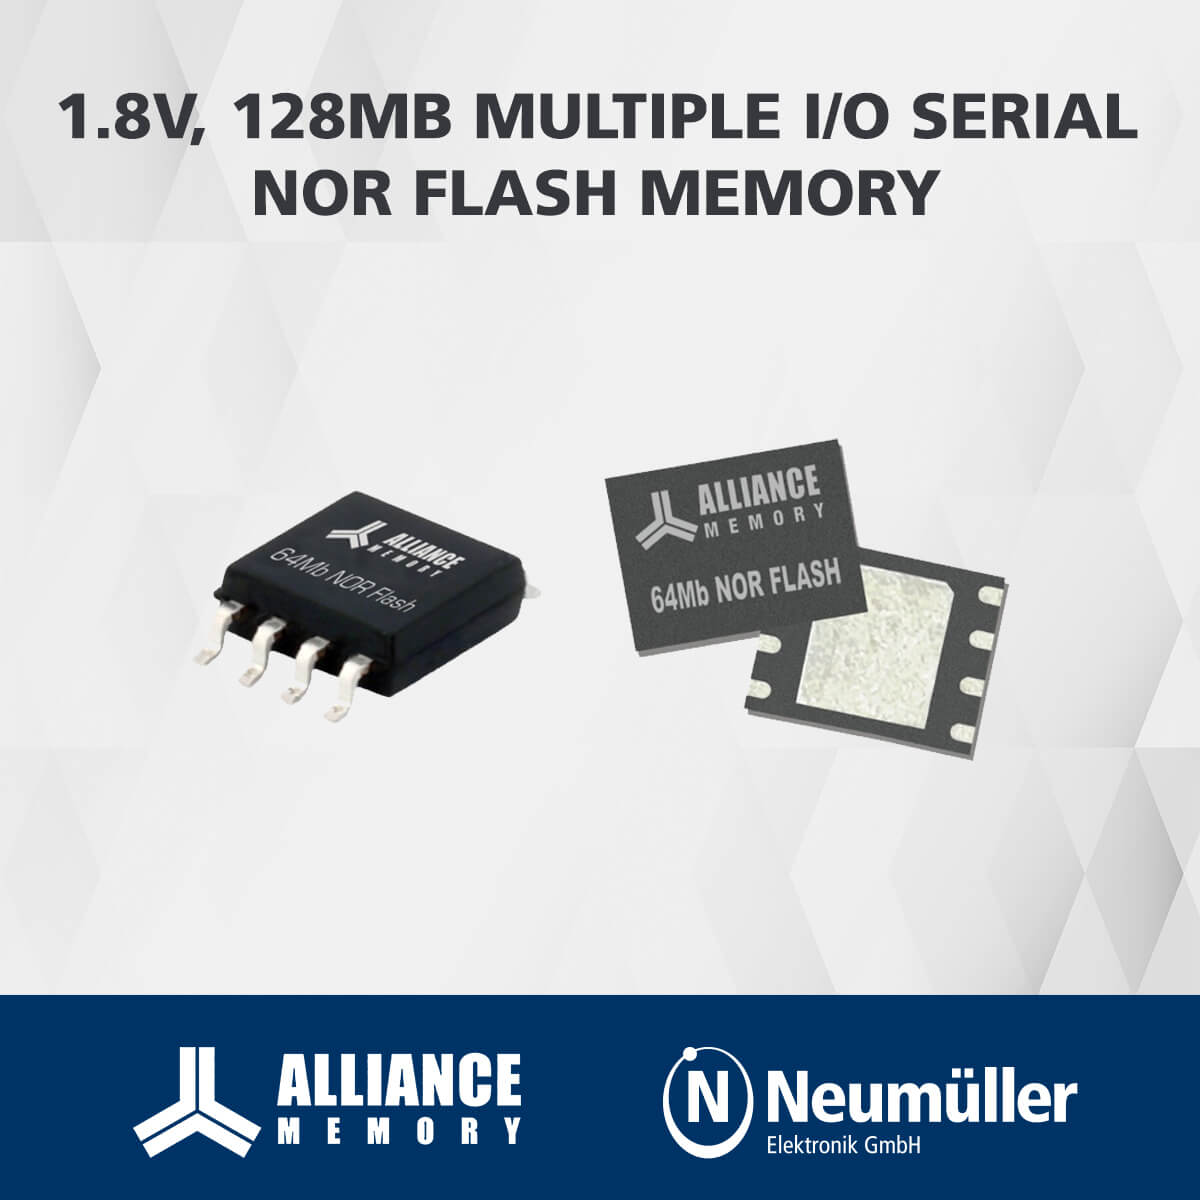 AS25F series from Alliance Memory extended with 2 new 128MB NOR Flash Memories